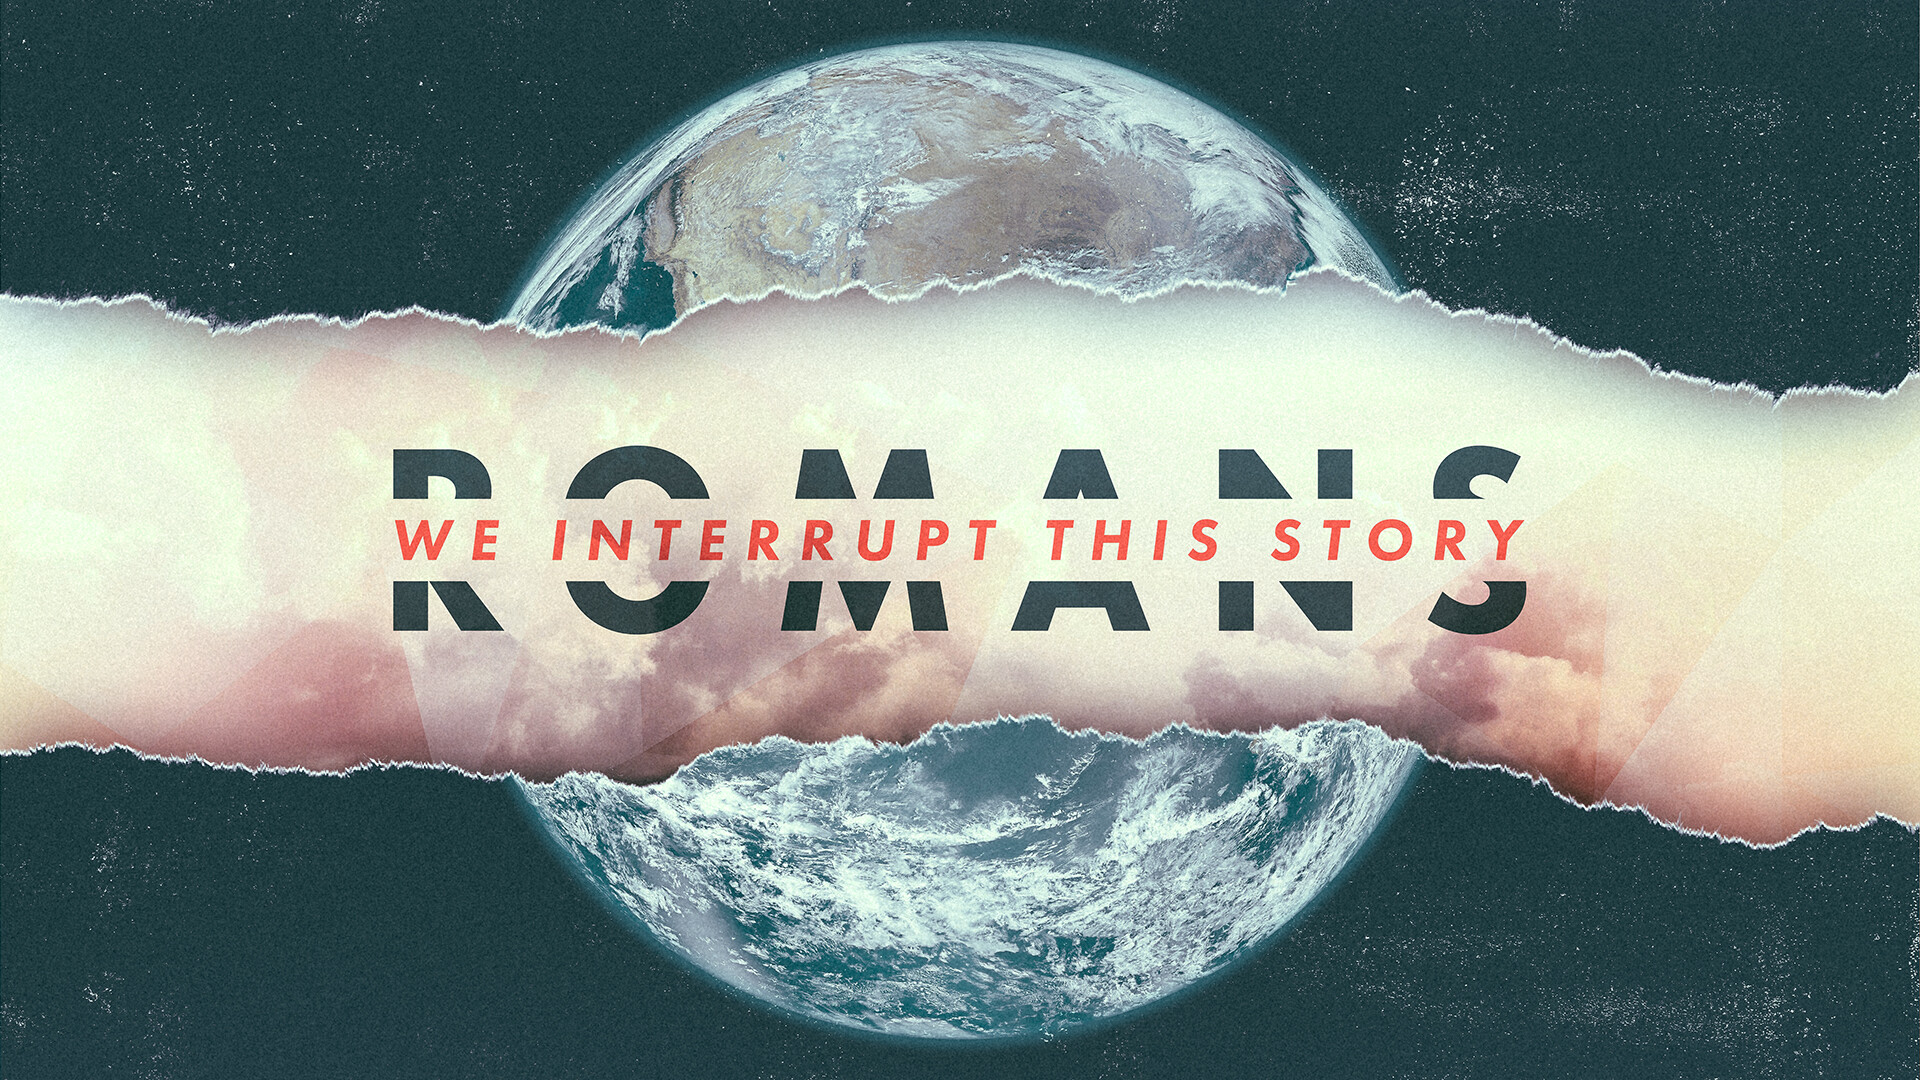 Romans 1 Part Two: We Interrupt This Story